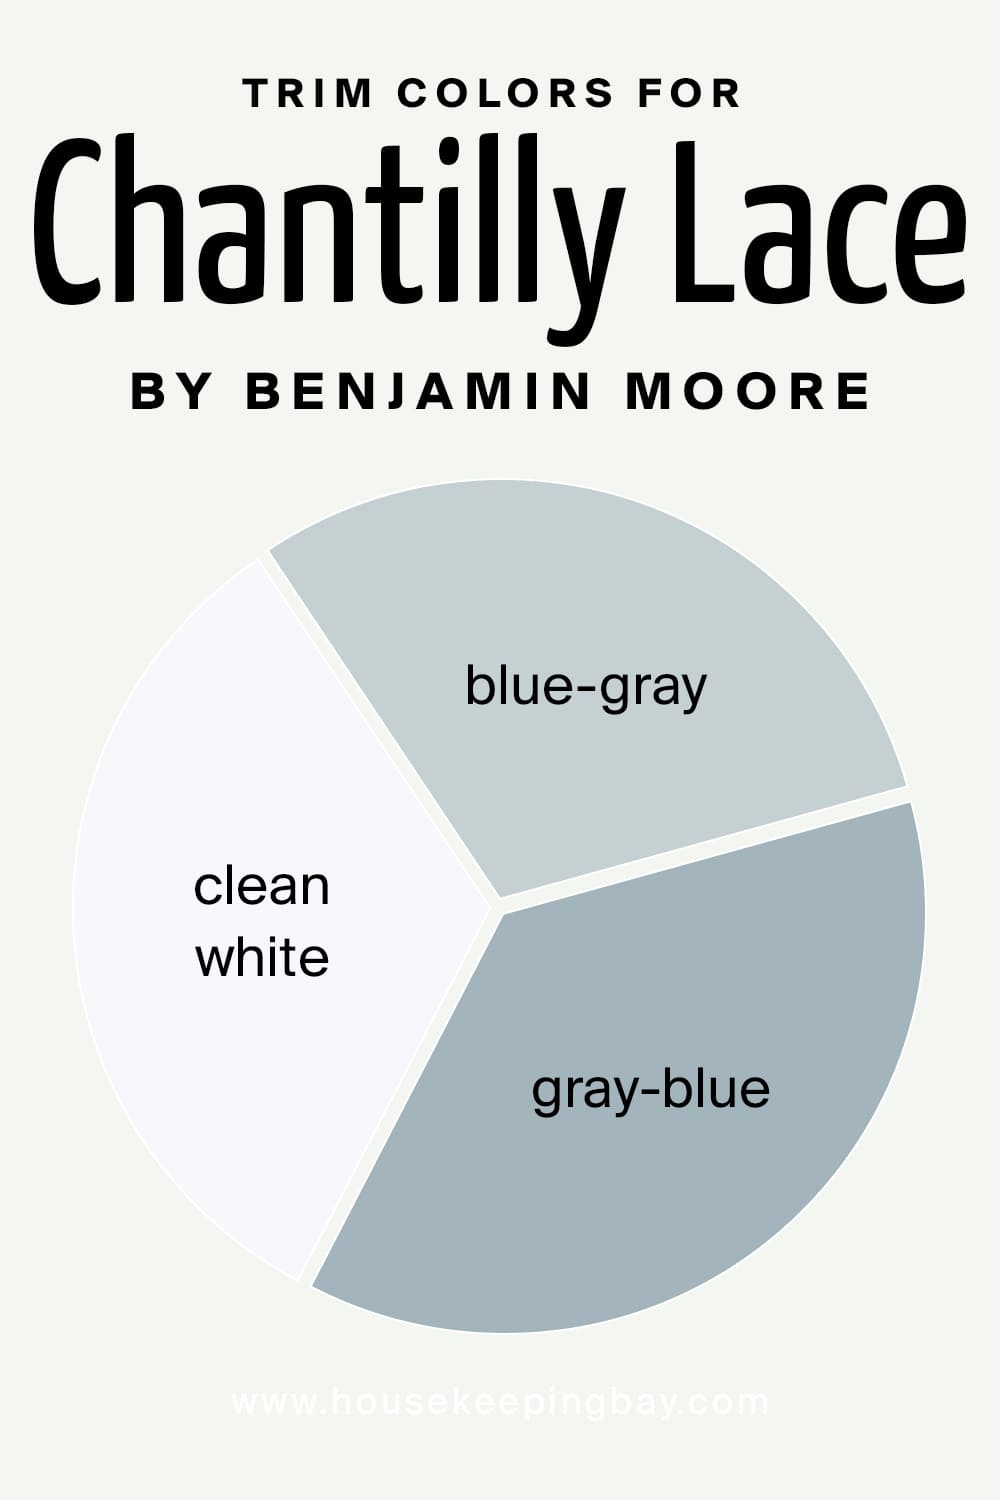 Trim Colors for Chantilly Lace by Benjamin Moore